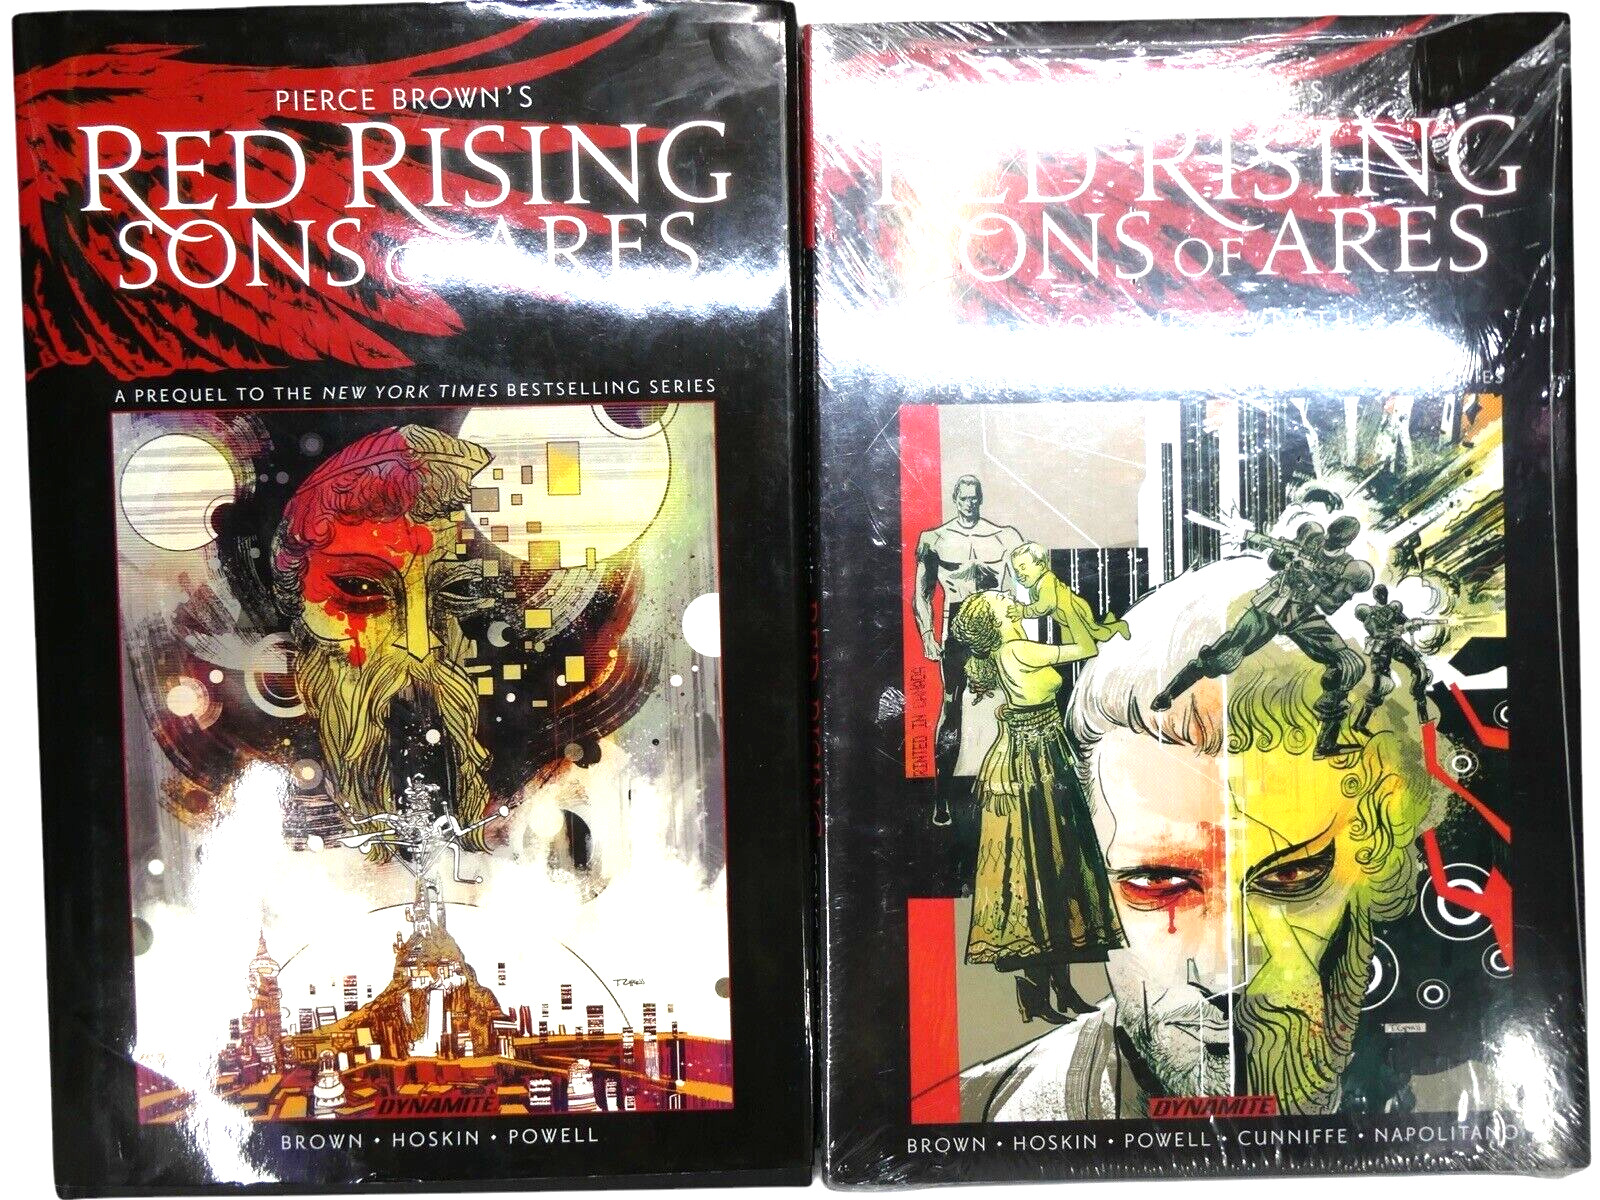 Pierce Brown’s Red Rising: Sons of Ares Vol 1 & 2 (Dynamite Entertainment, 2018)